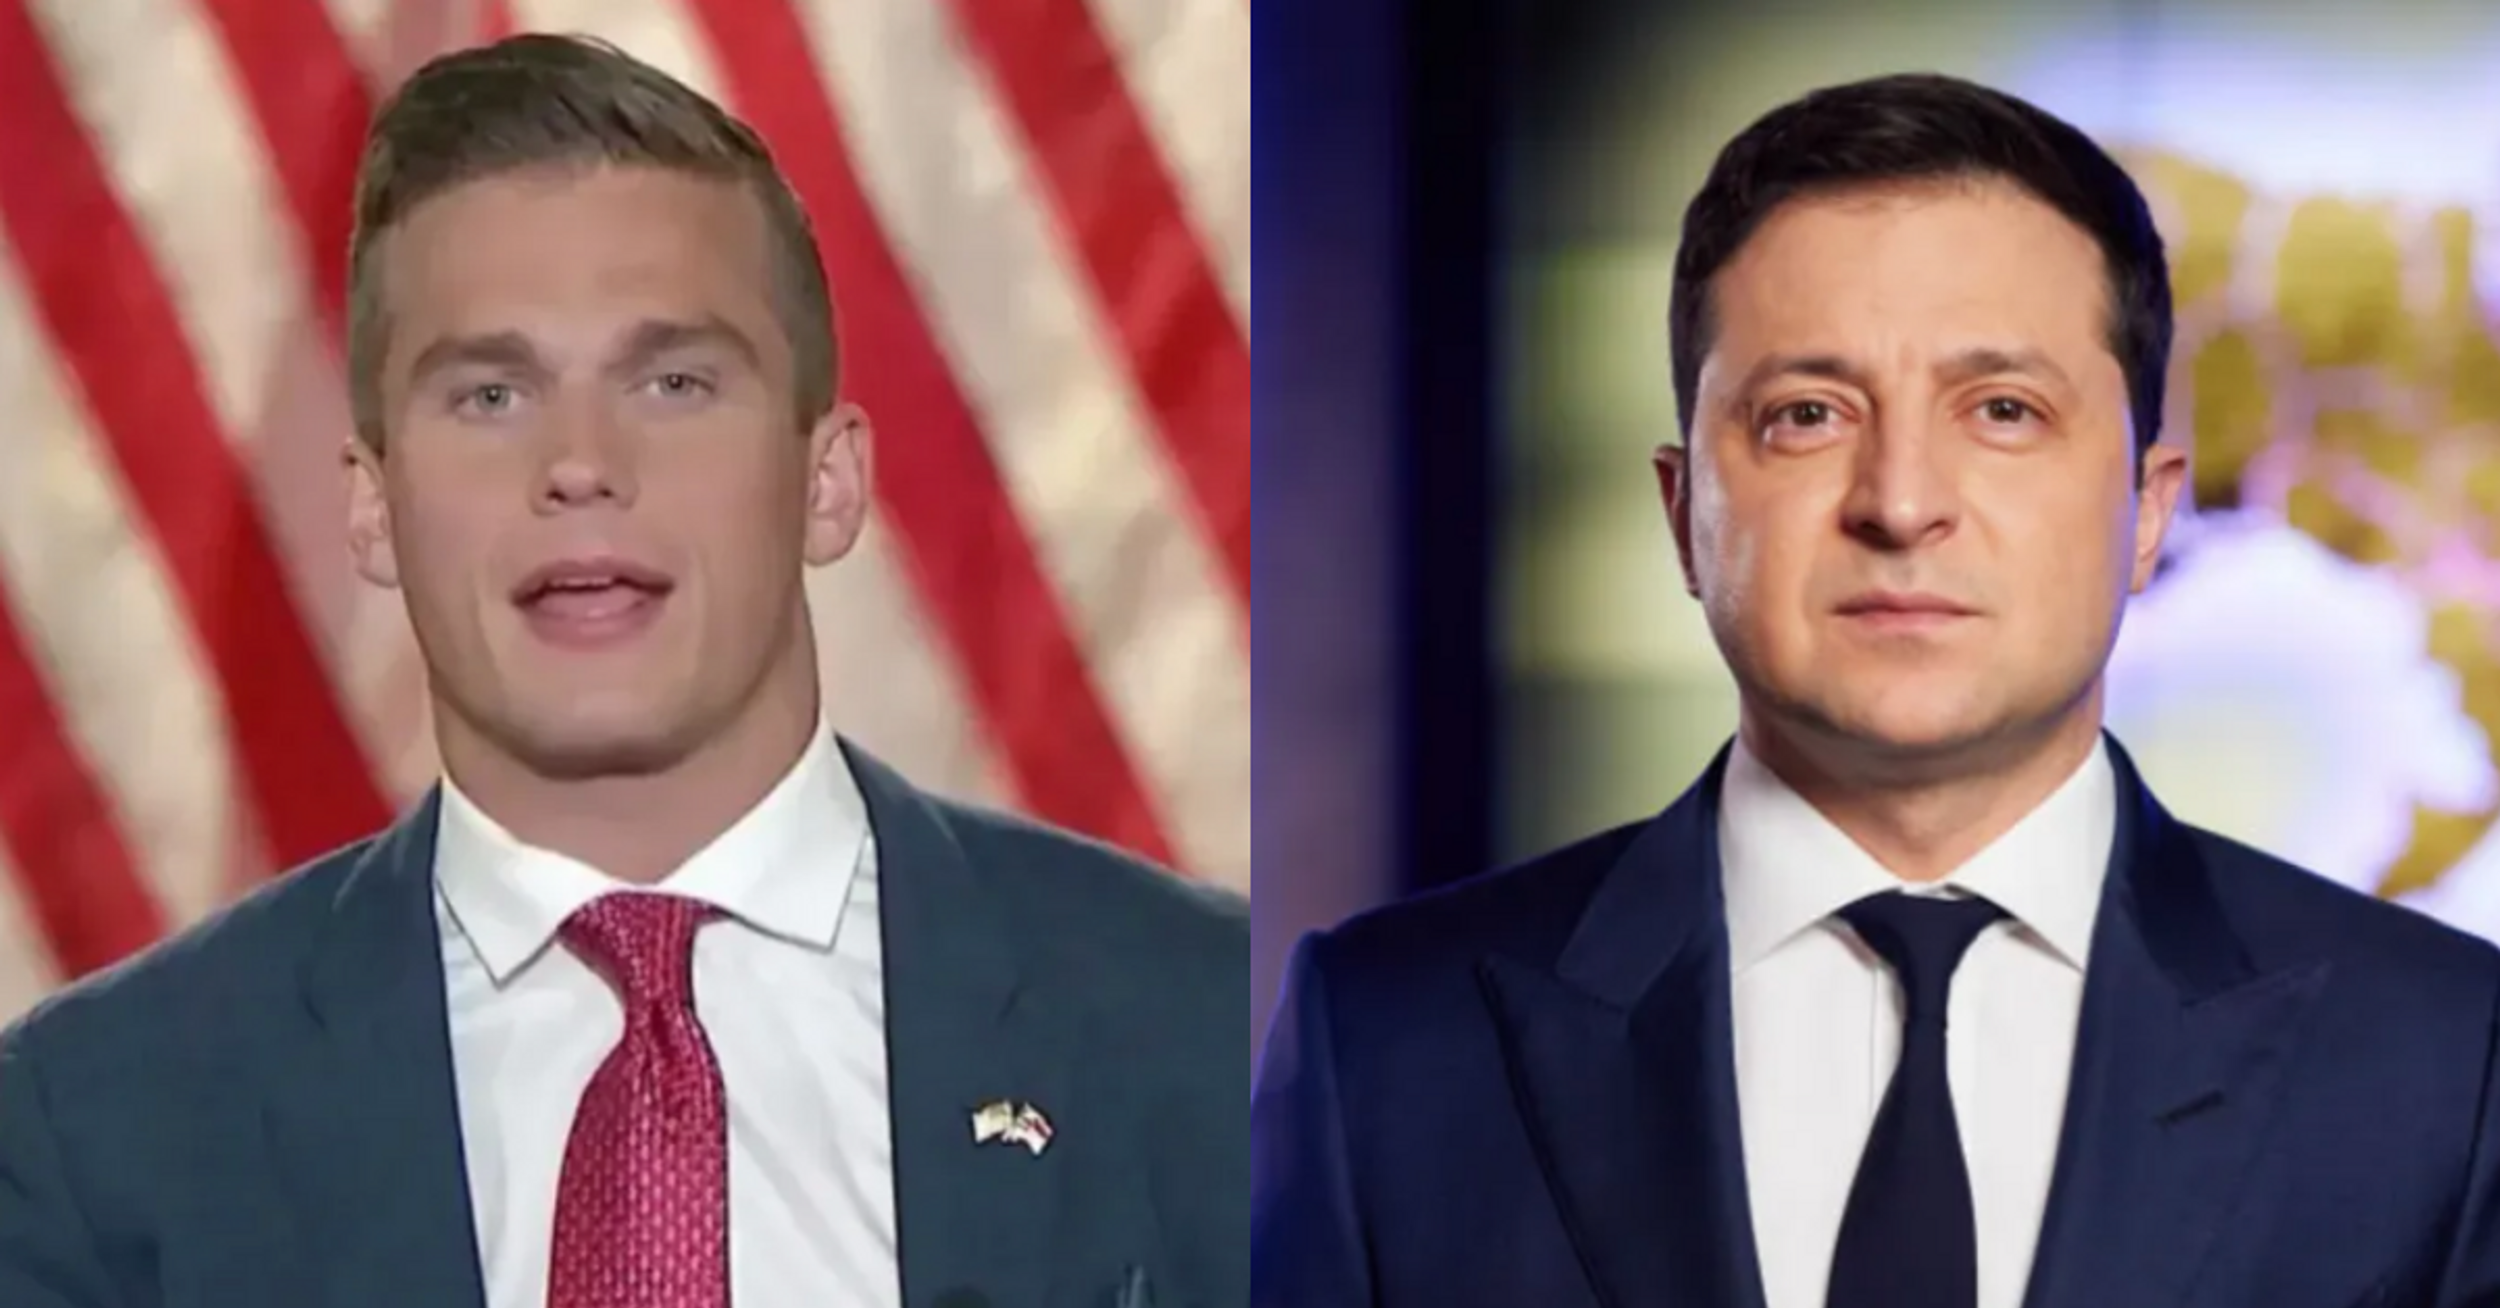 Video Surfaces Of Cawthorn Calling Zelenskyy A 'Thug' For Pushing 'Woke Ideologies' In Ukraine